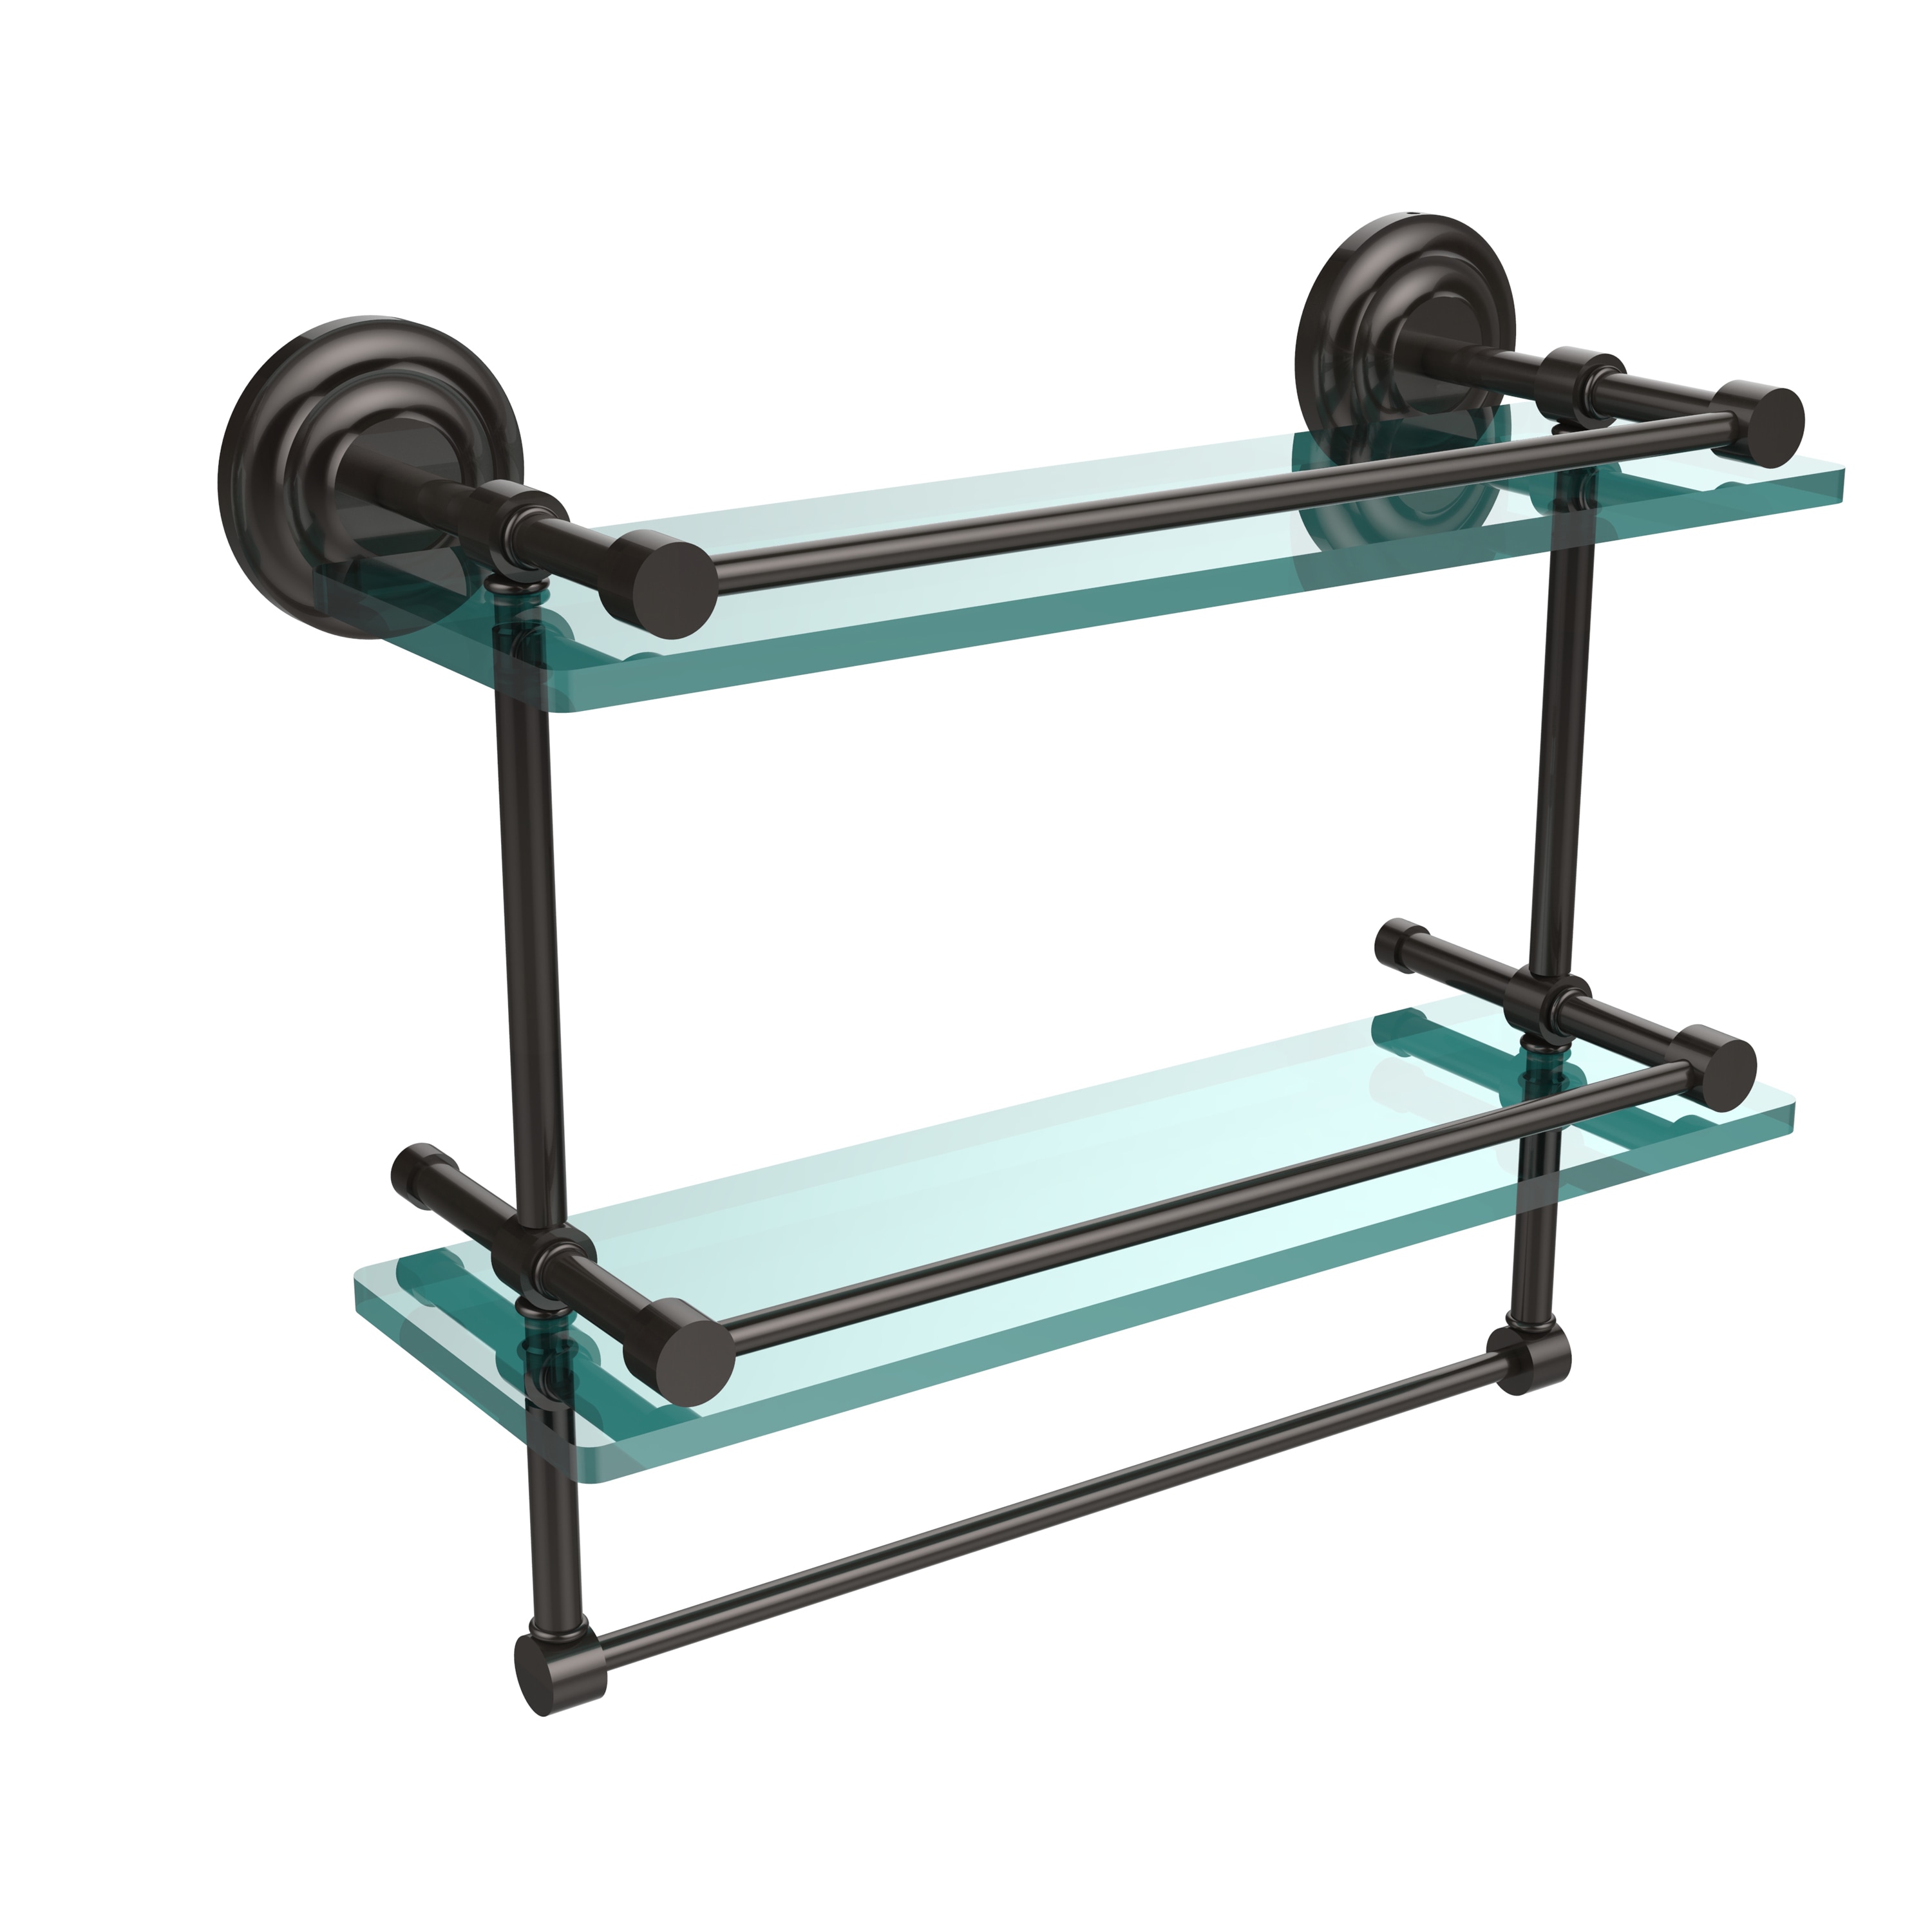 16-in Gallery Double Glass Shelf with Towel Bar in Satin Chrome - image 2 of 5